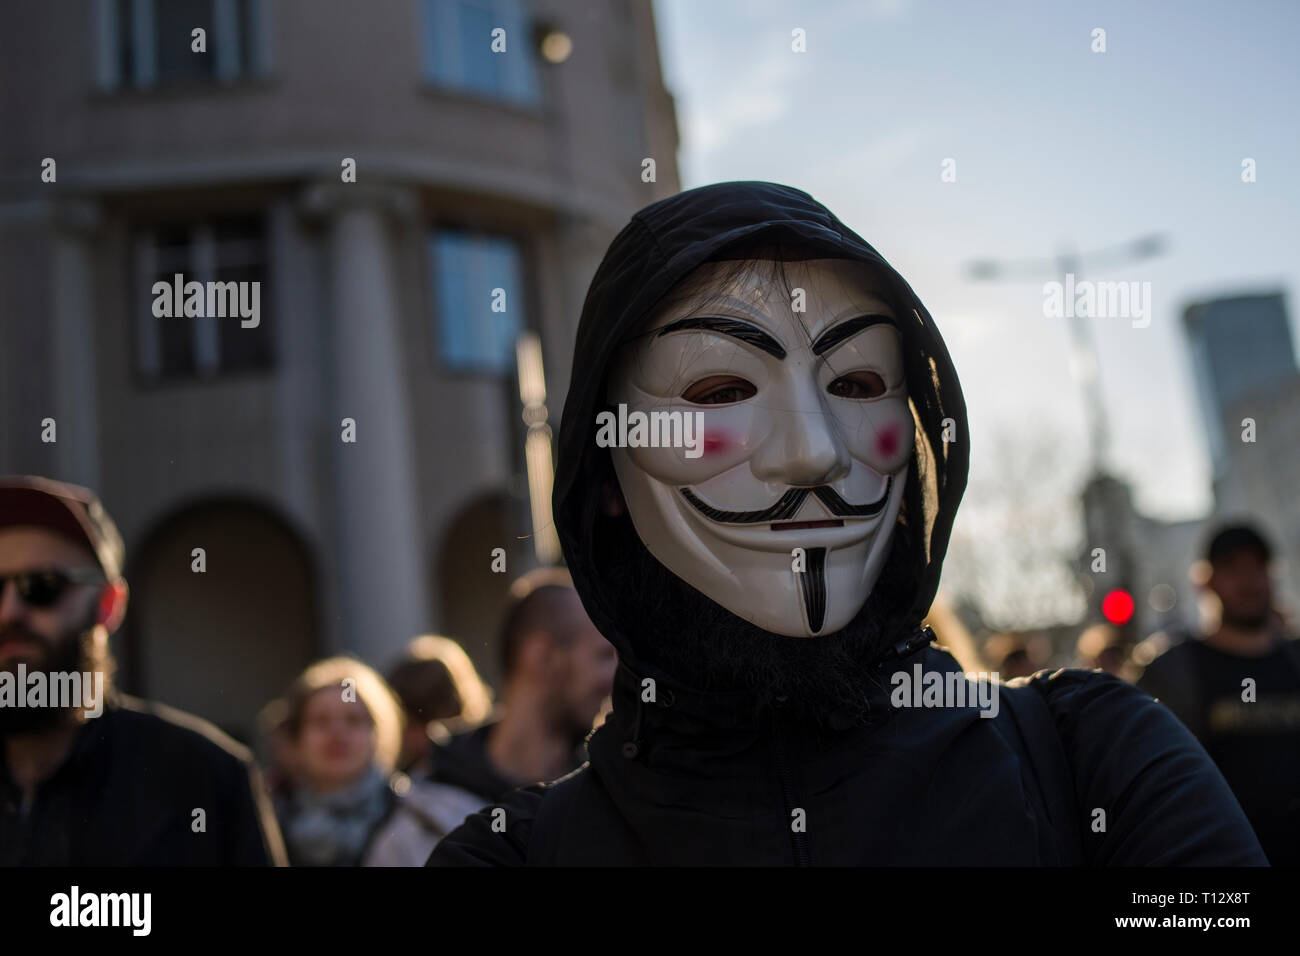 A protester seen wearing Anonymous mask during the protest. Voting on the change of copyright in the European Union will take place in the last days of March. Therefore, on March 23, opponents of the controversial articles 11 and 13 intend to mobilize and take to the streets. The international Stop Acta 2.0 protest actions also took place in Warsaw and other numerous cities in Poland. Stock Photo